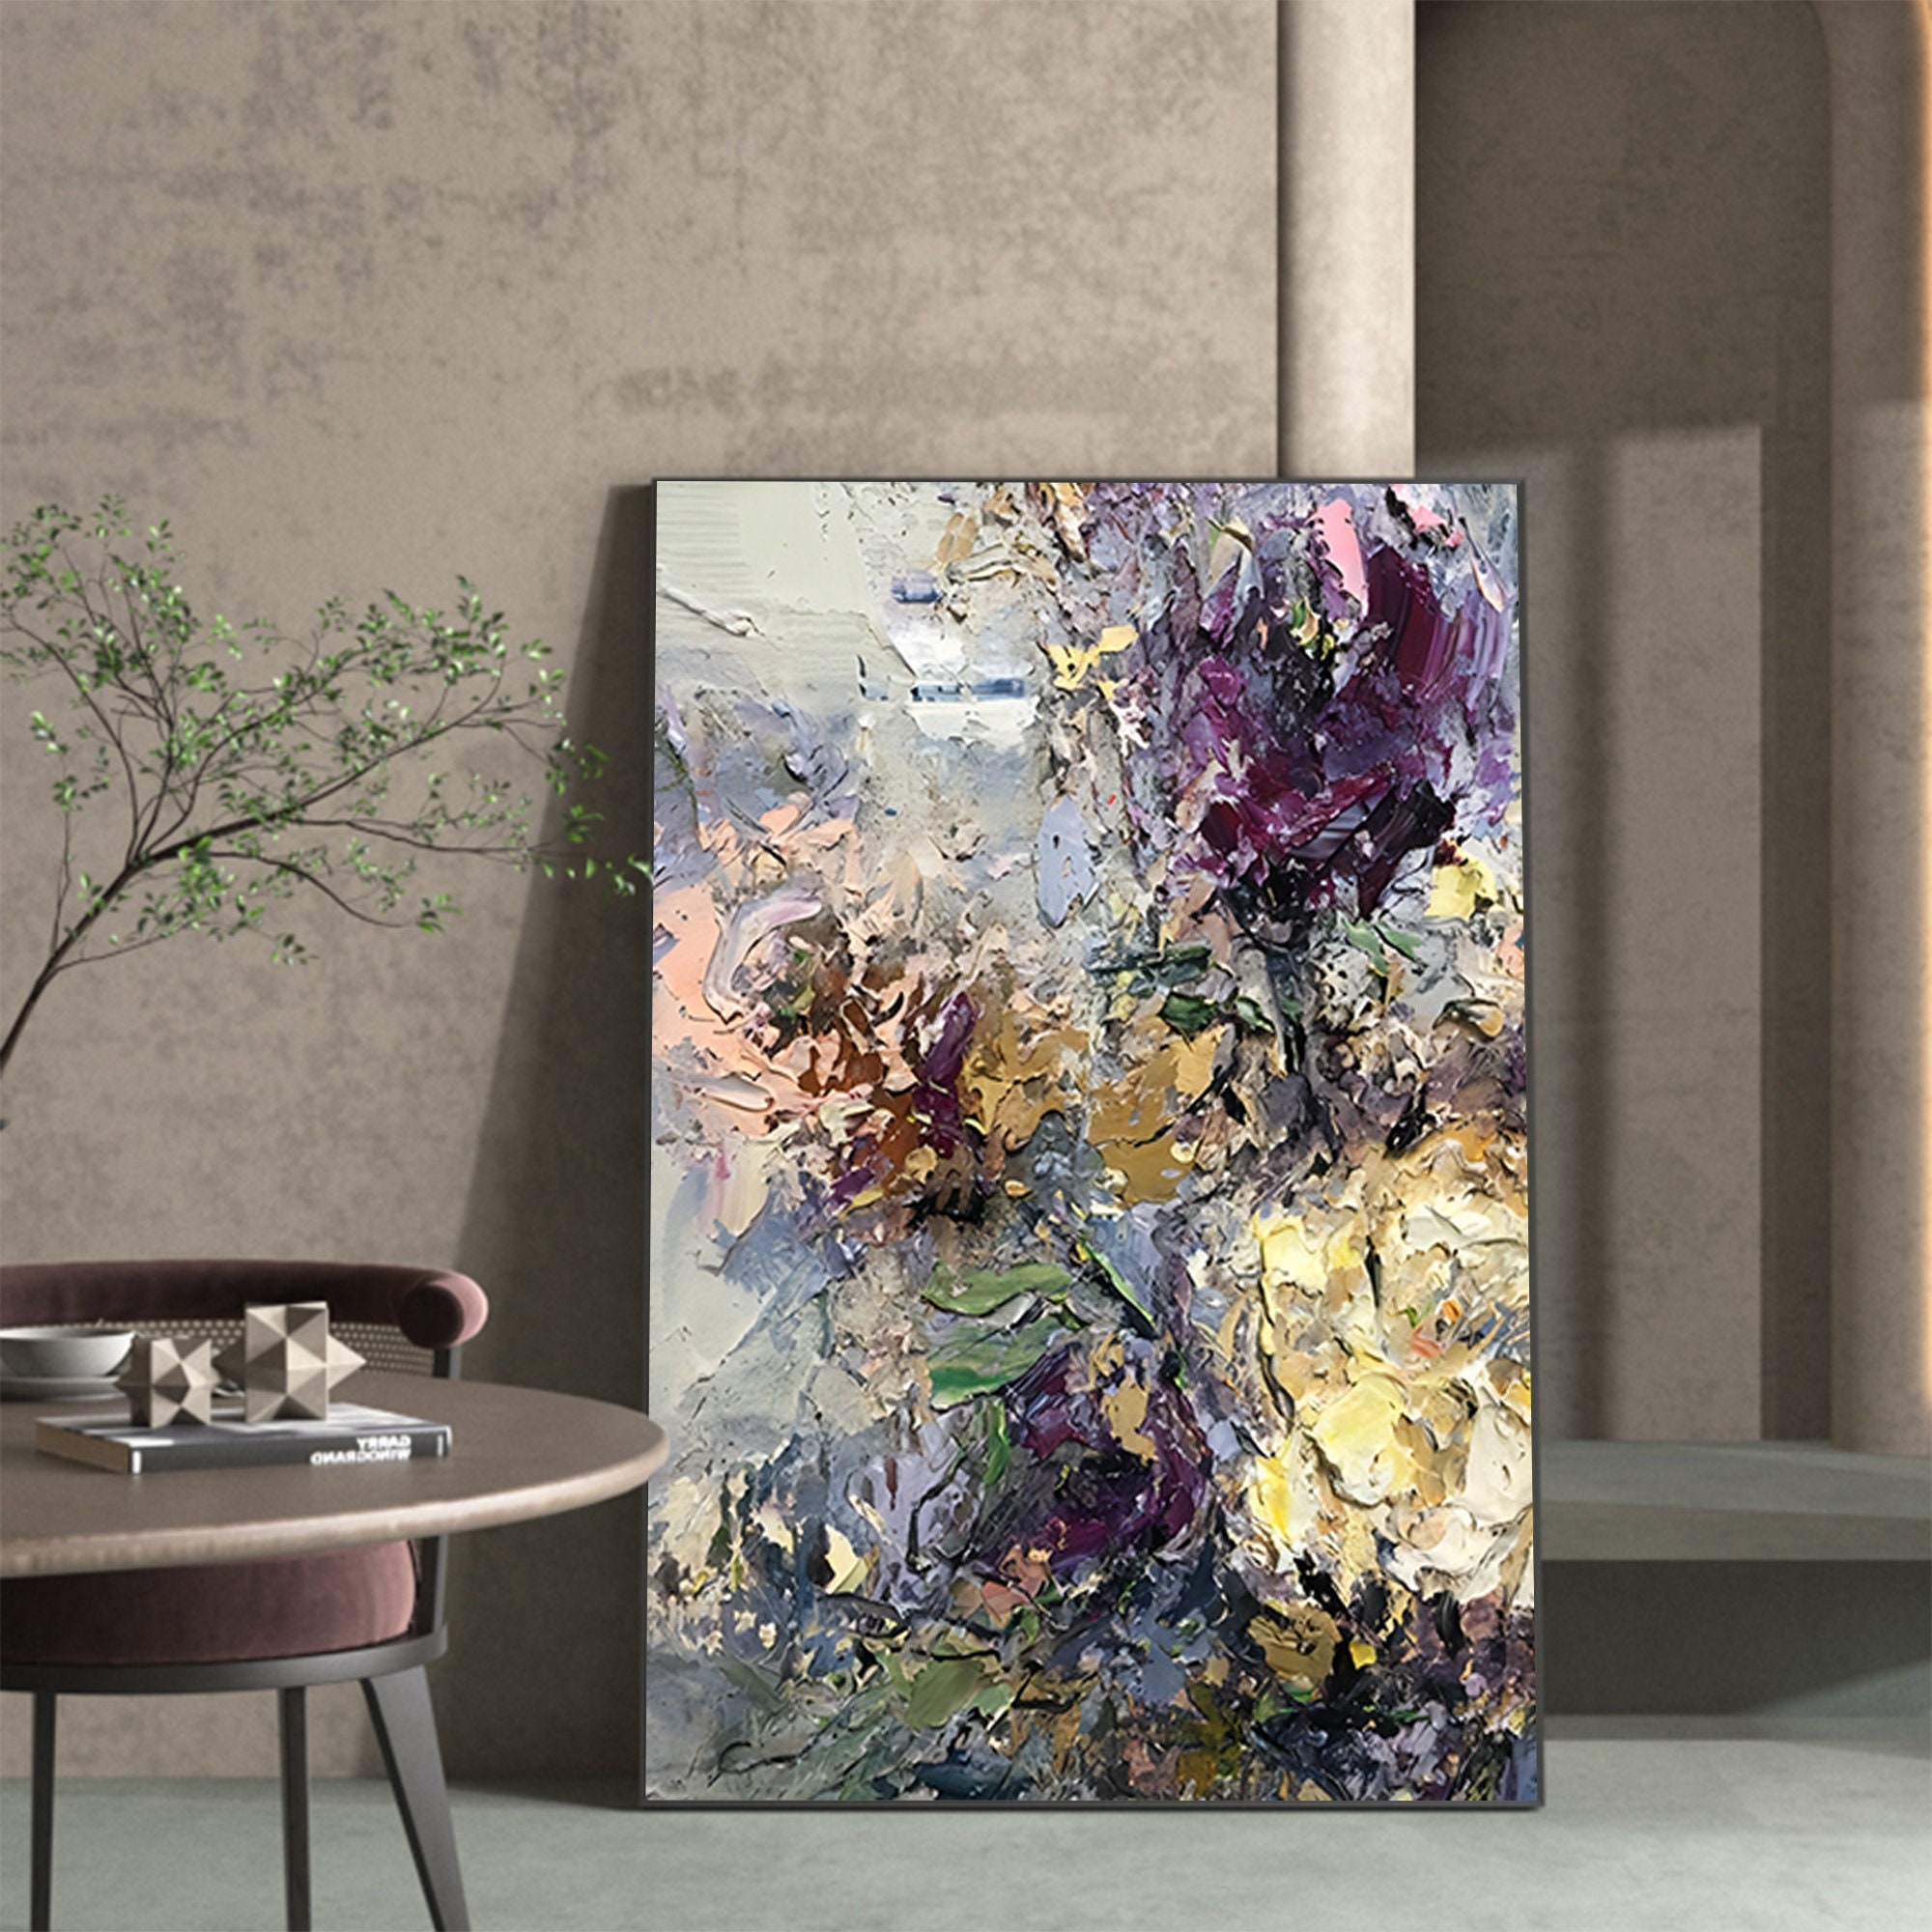 Original Texture Large Colorful Acrylic Painting Canvas Vibrant Colorful  Abstract Flowers Oil Painting Modern Wall Art